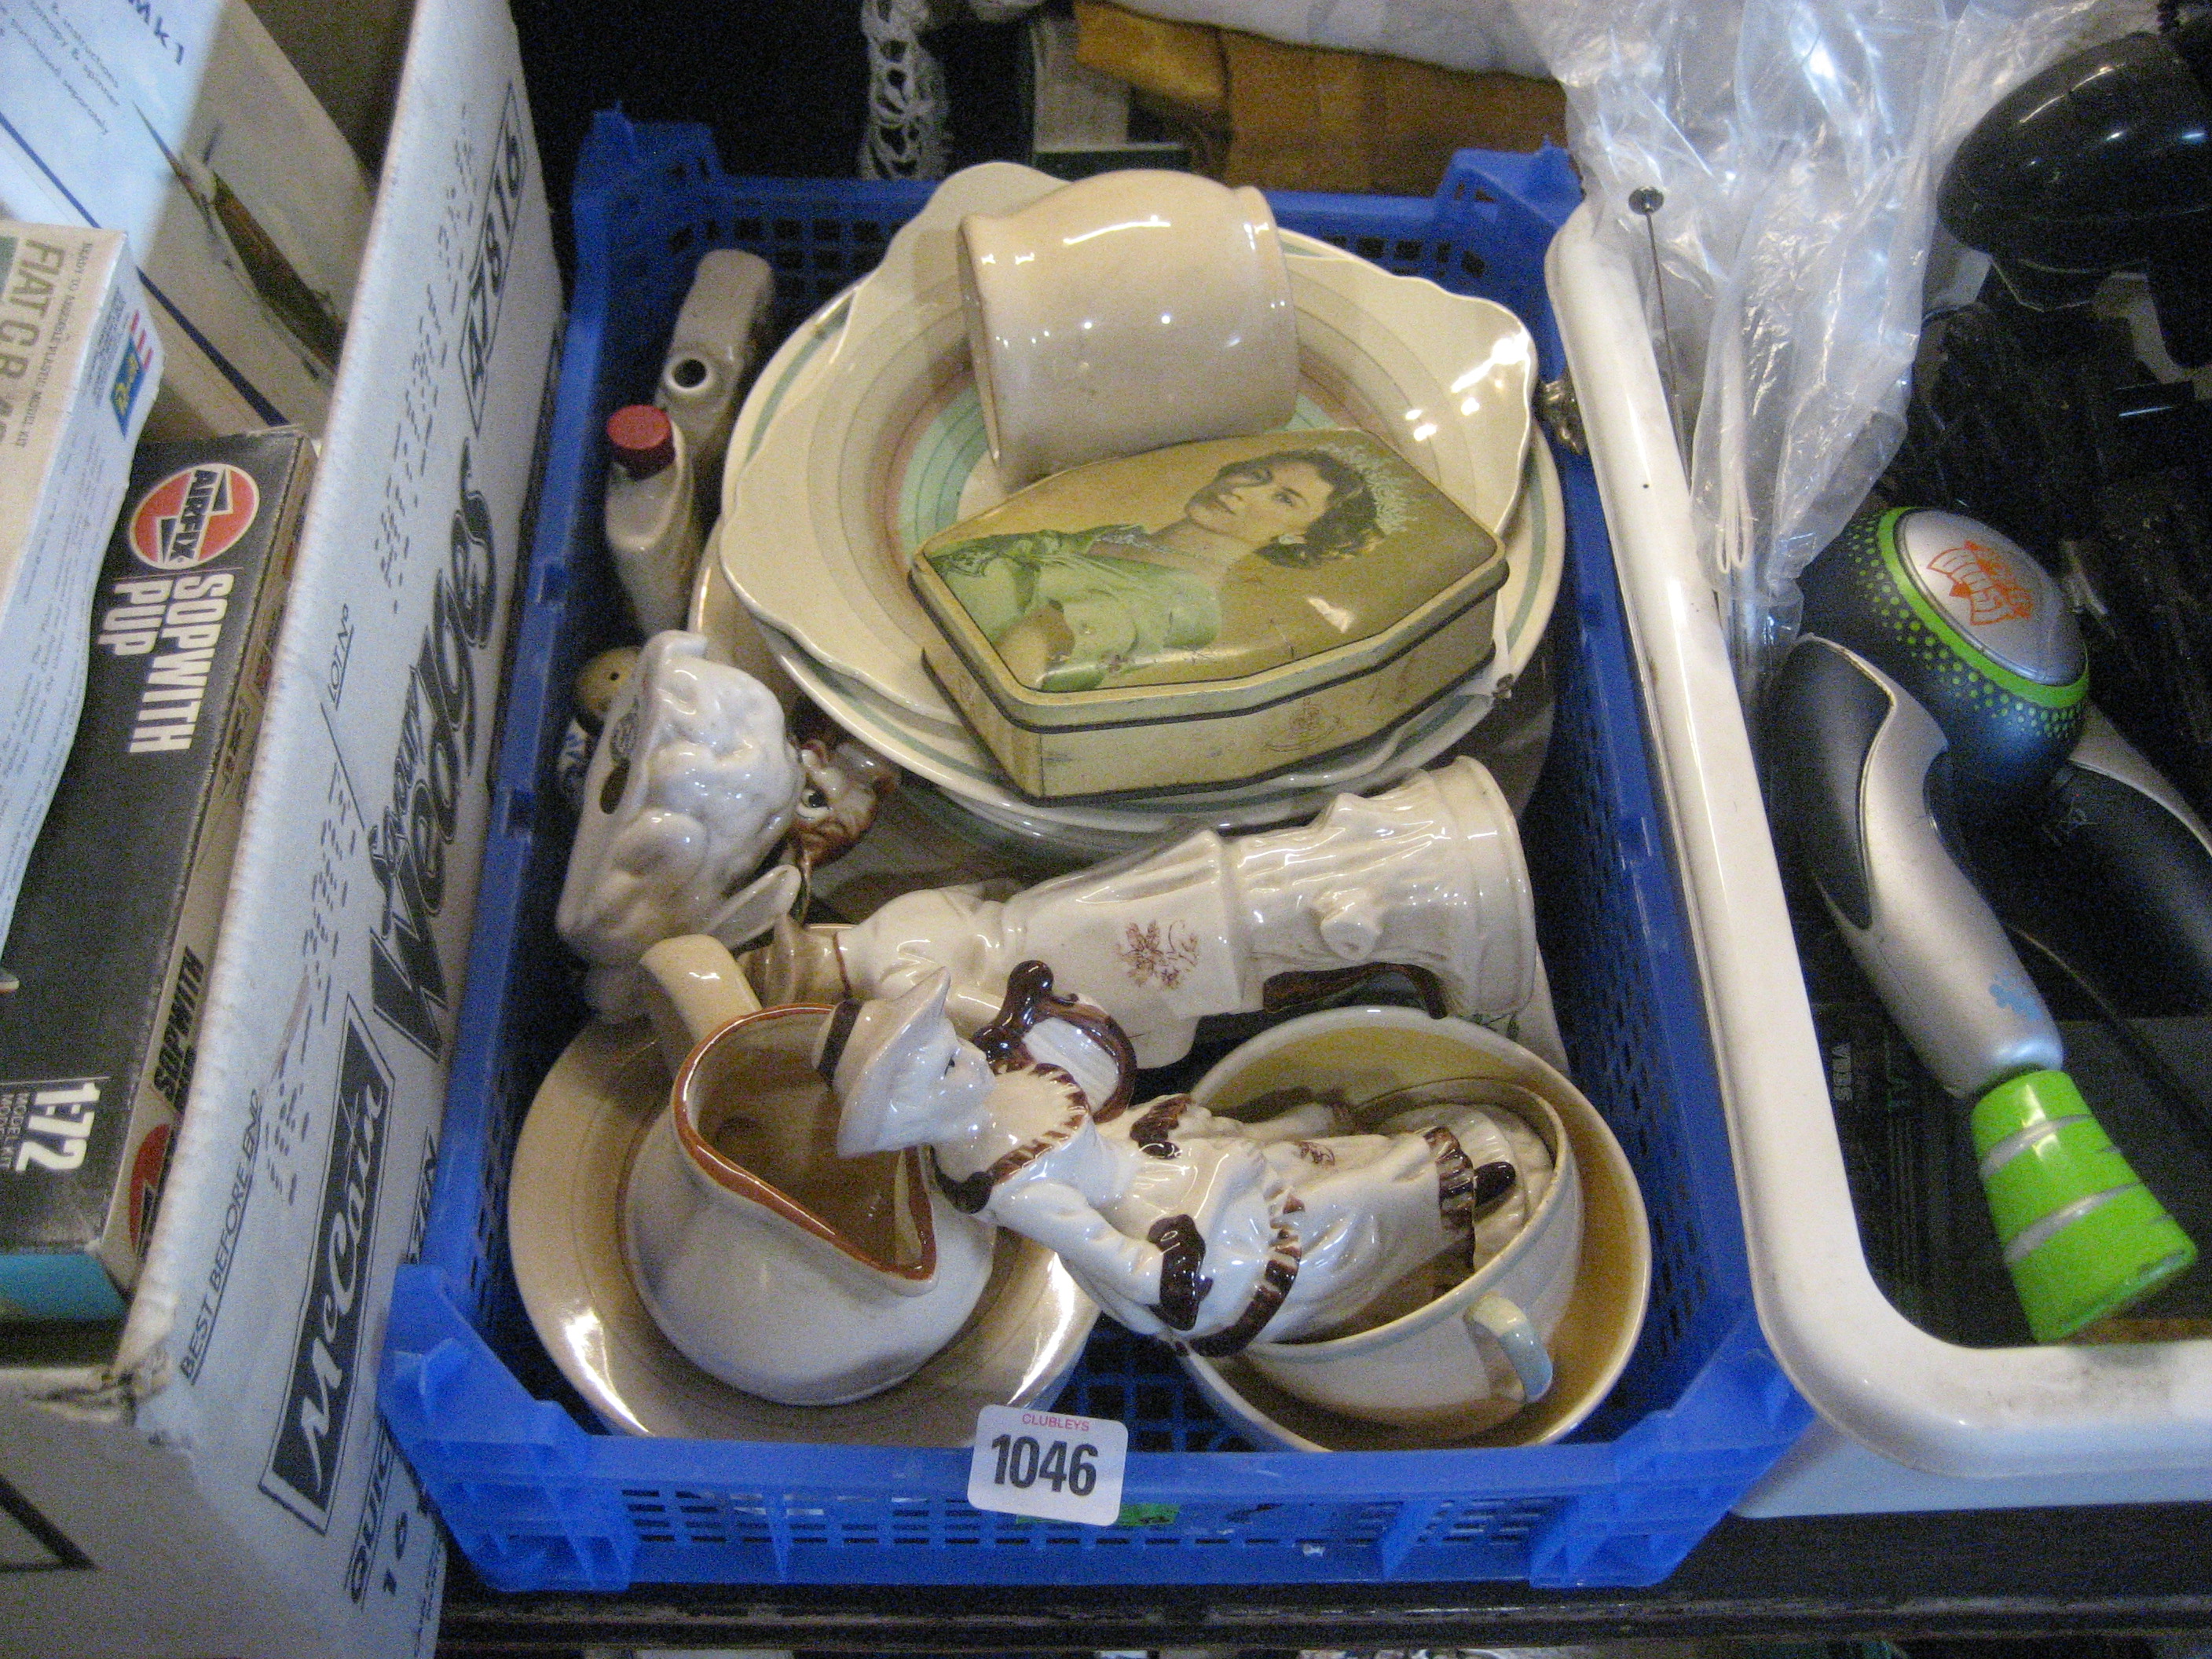 GOSS RAMSGATE HARE/MISC CHINA ETC - CONTENTS IN ONE BOX